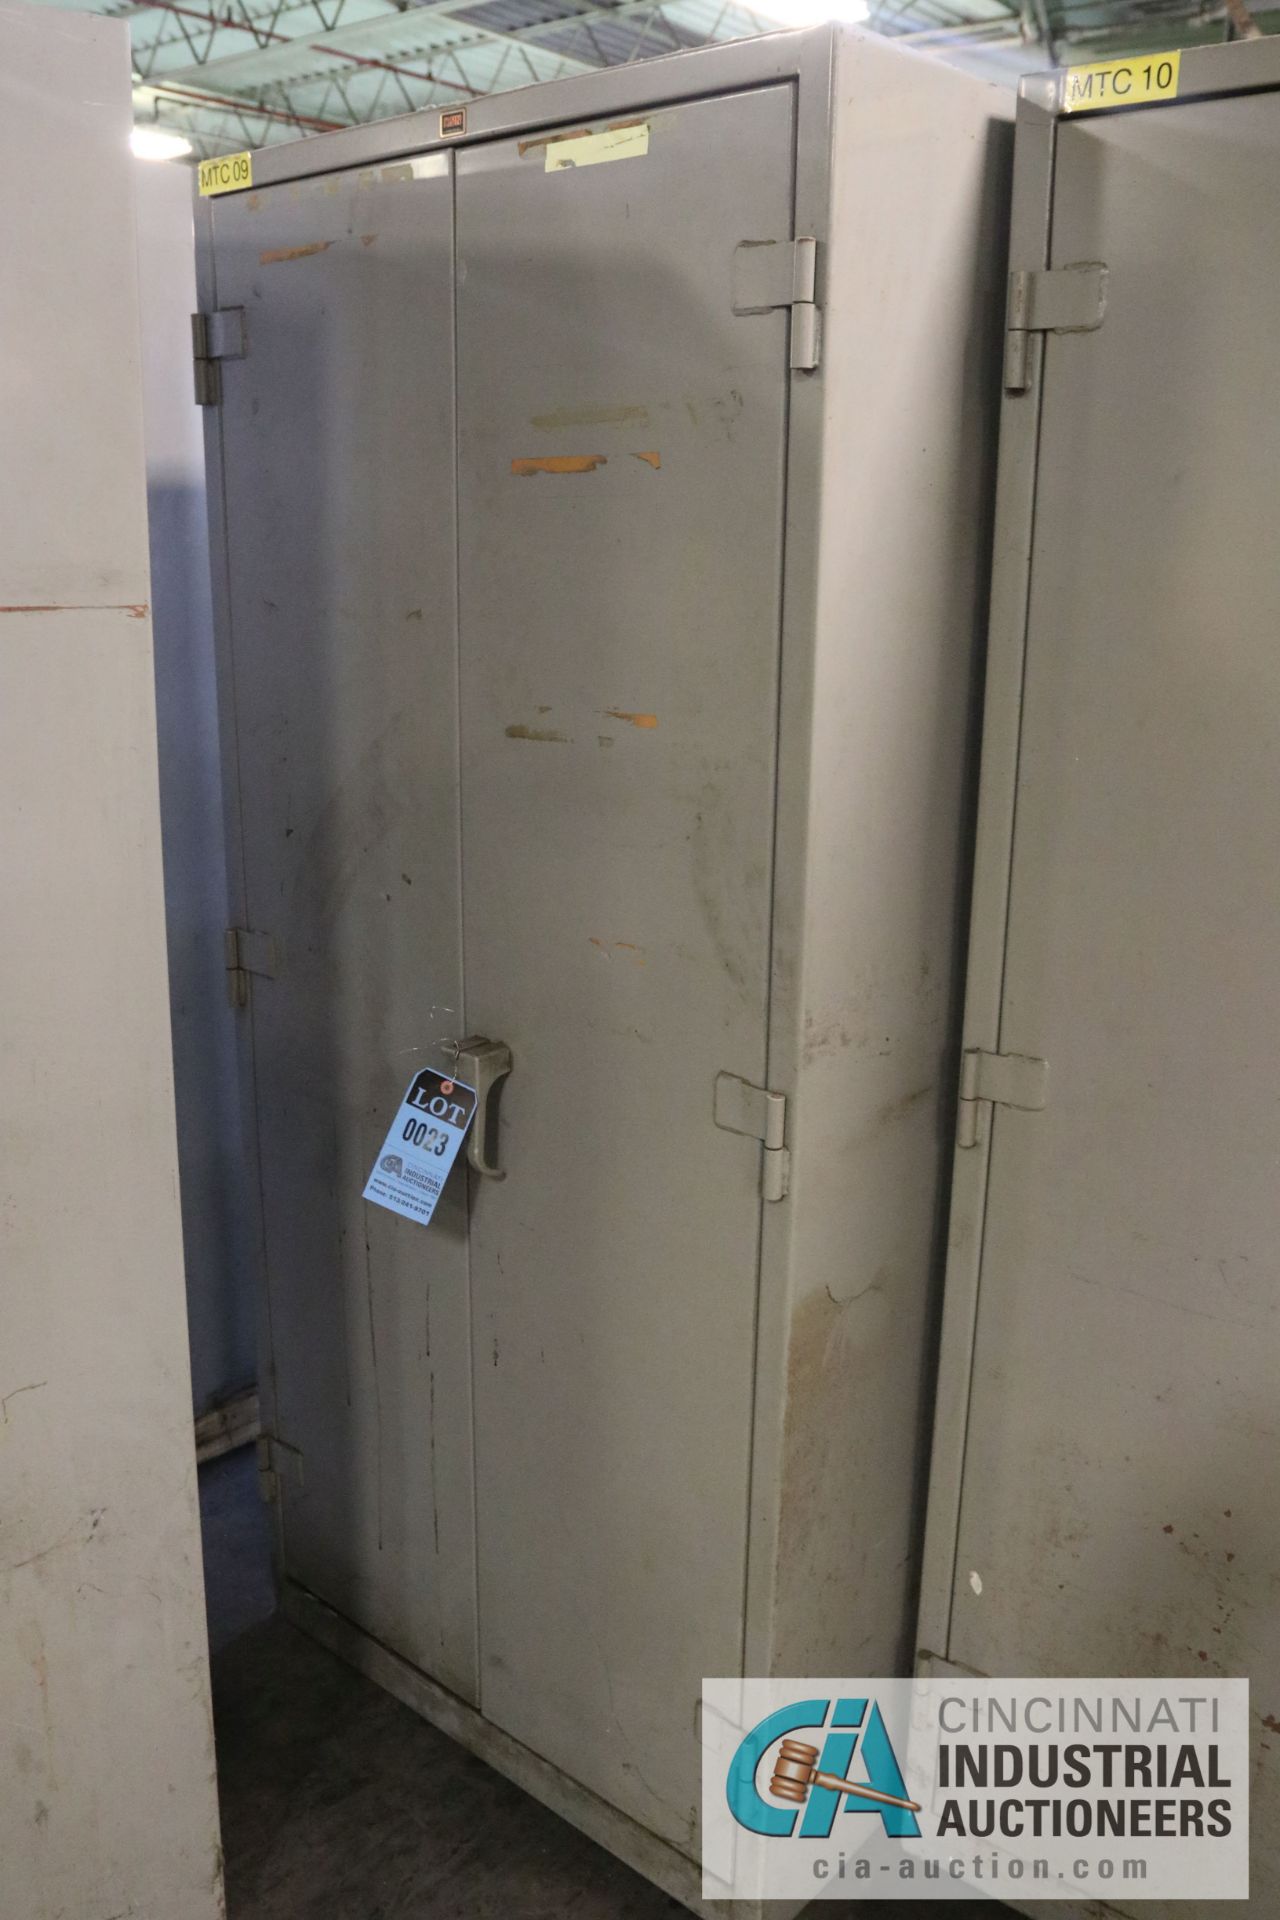 36" X 21" X 78" LYON CABINET W/ SHELVES - $10.00 Rigging Fee Due to Onsite Rigger - Located in